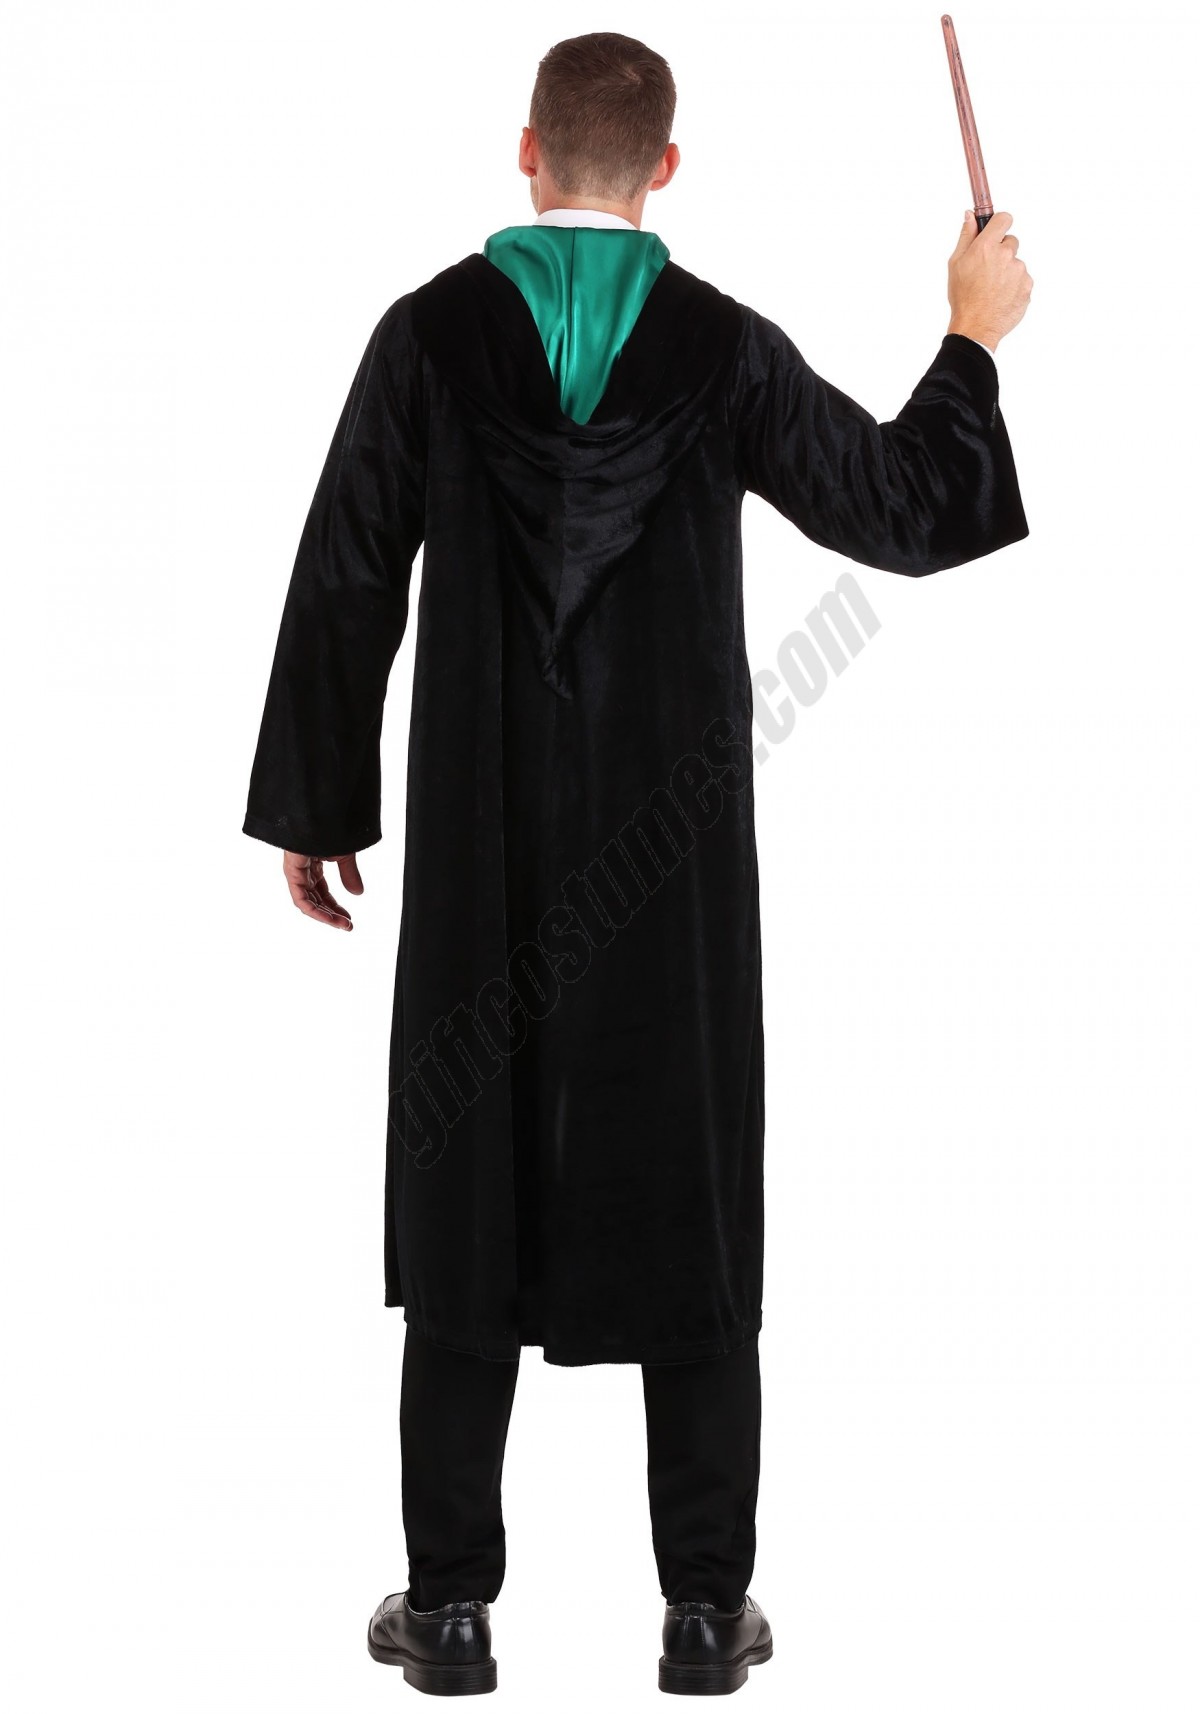 Deluxe Harry Potter Slytherin Adult Plus Size Robe Costume Promotions - -1